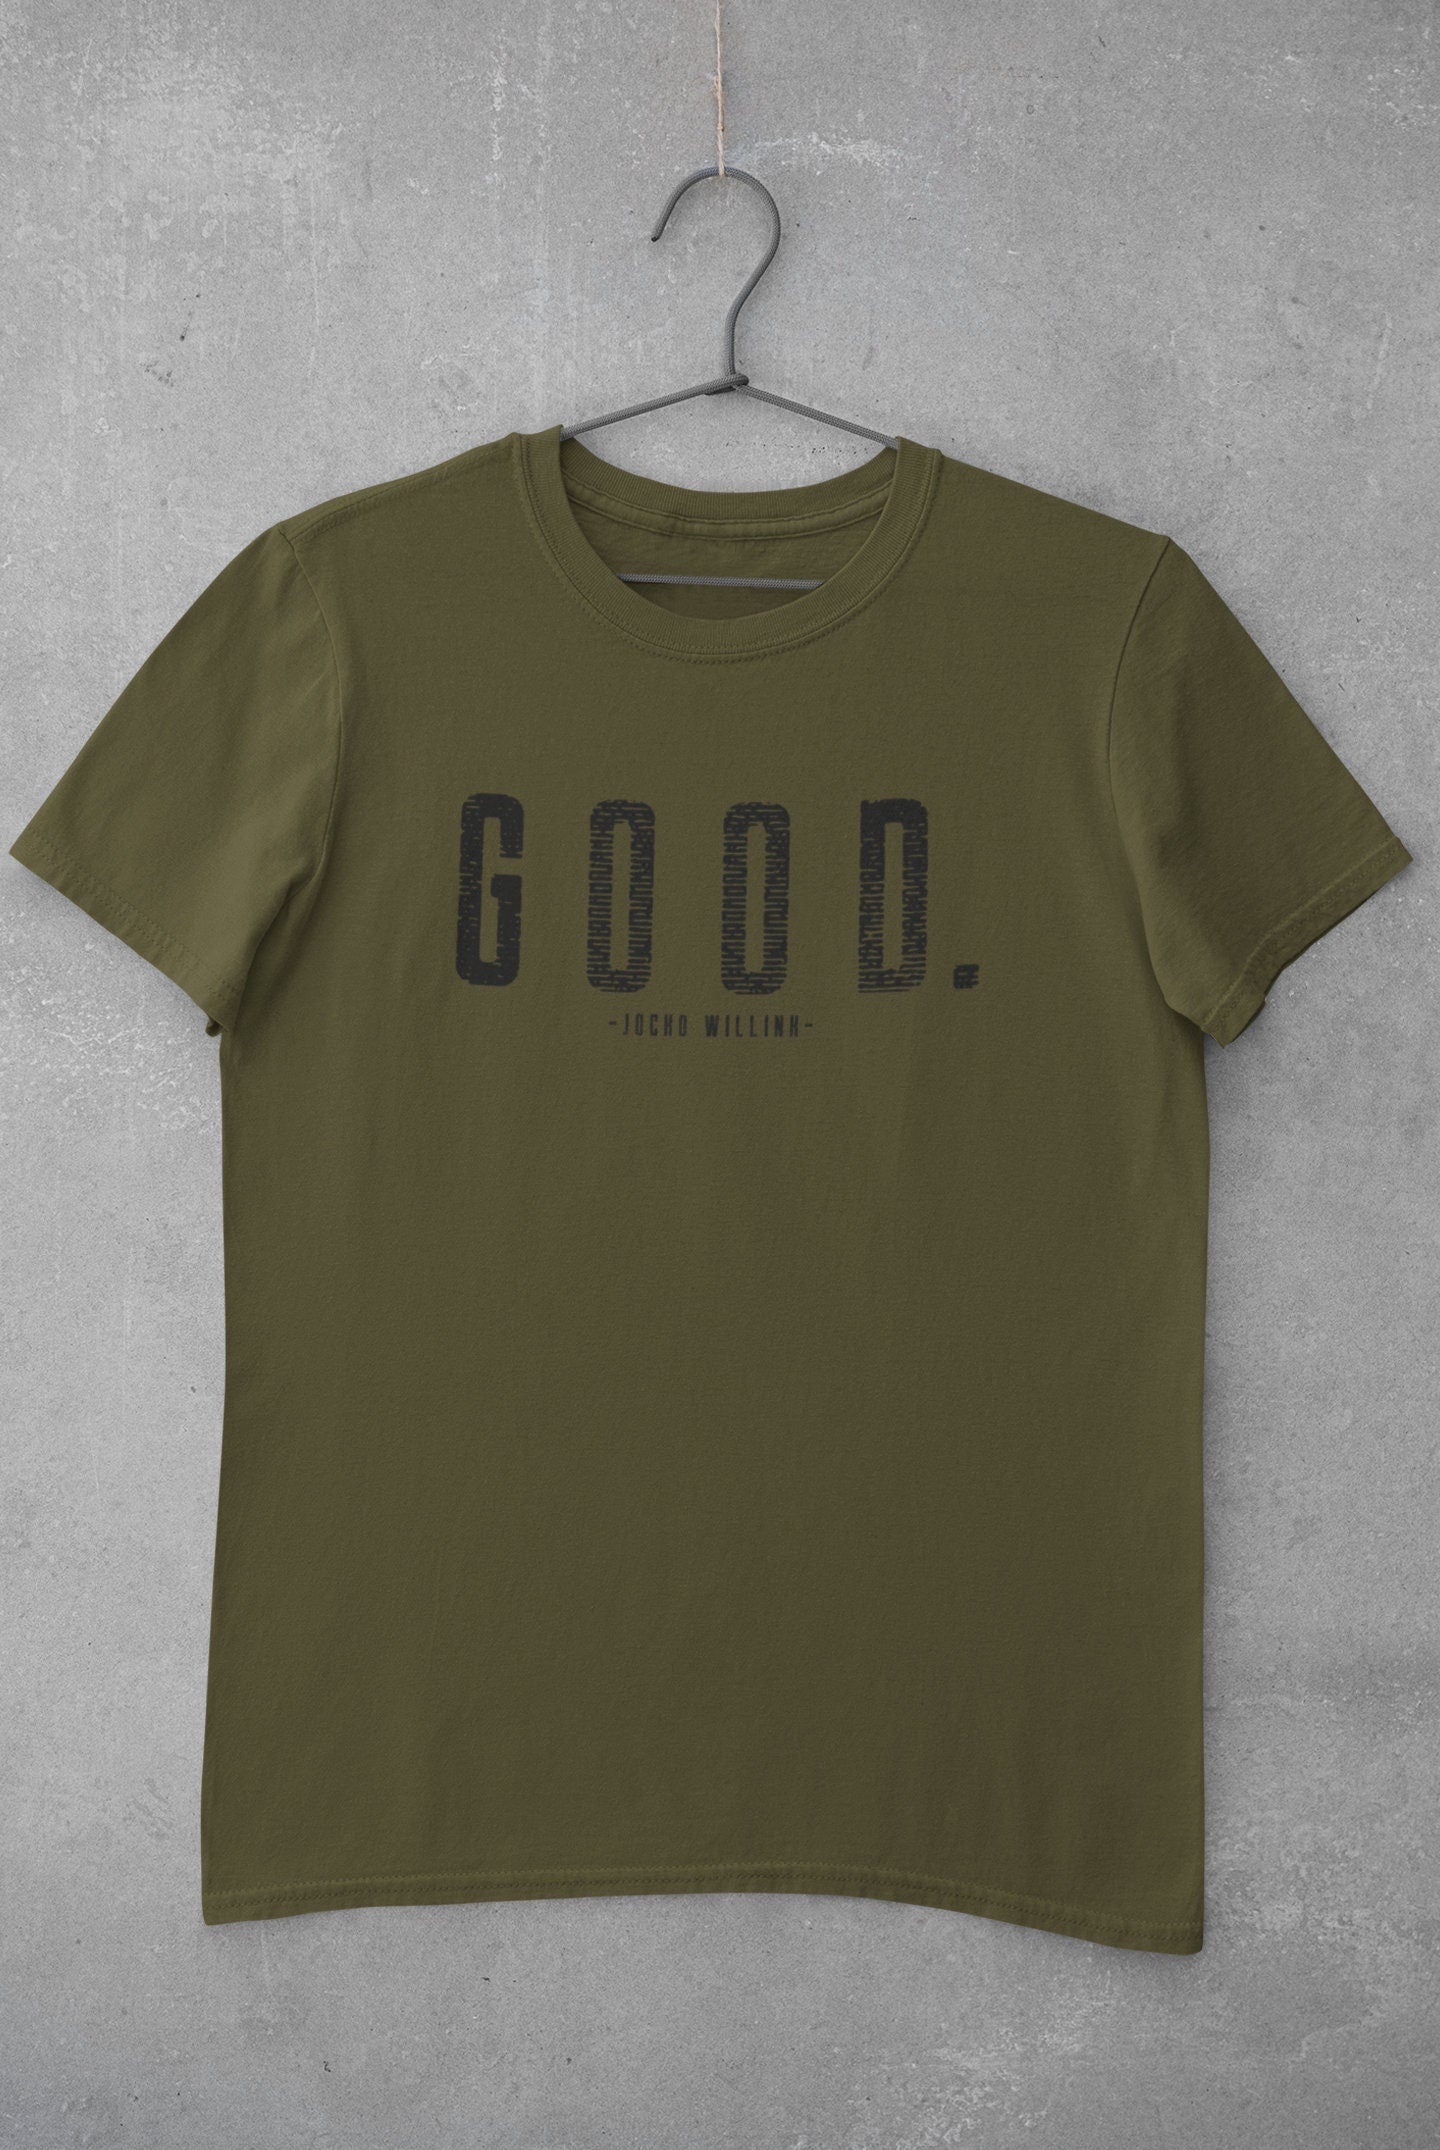 GOOD. - Jocko Willink Inspired Navy Seal Army Graphic T Shirt